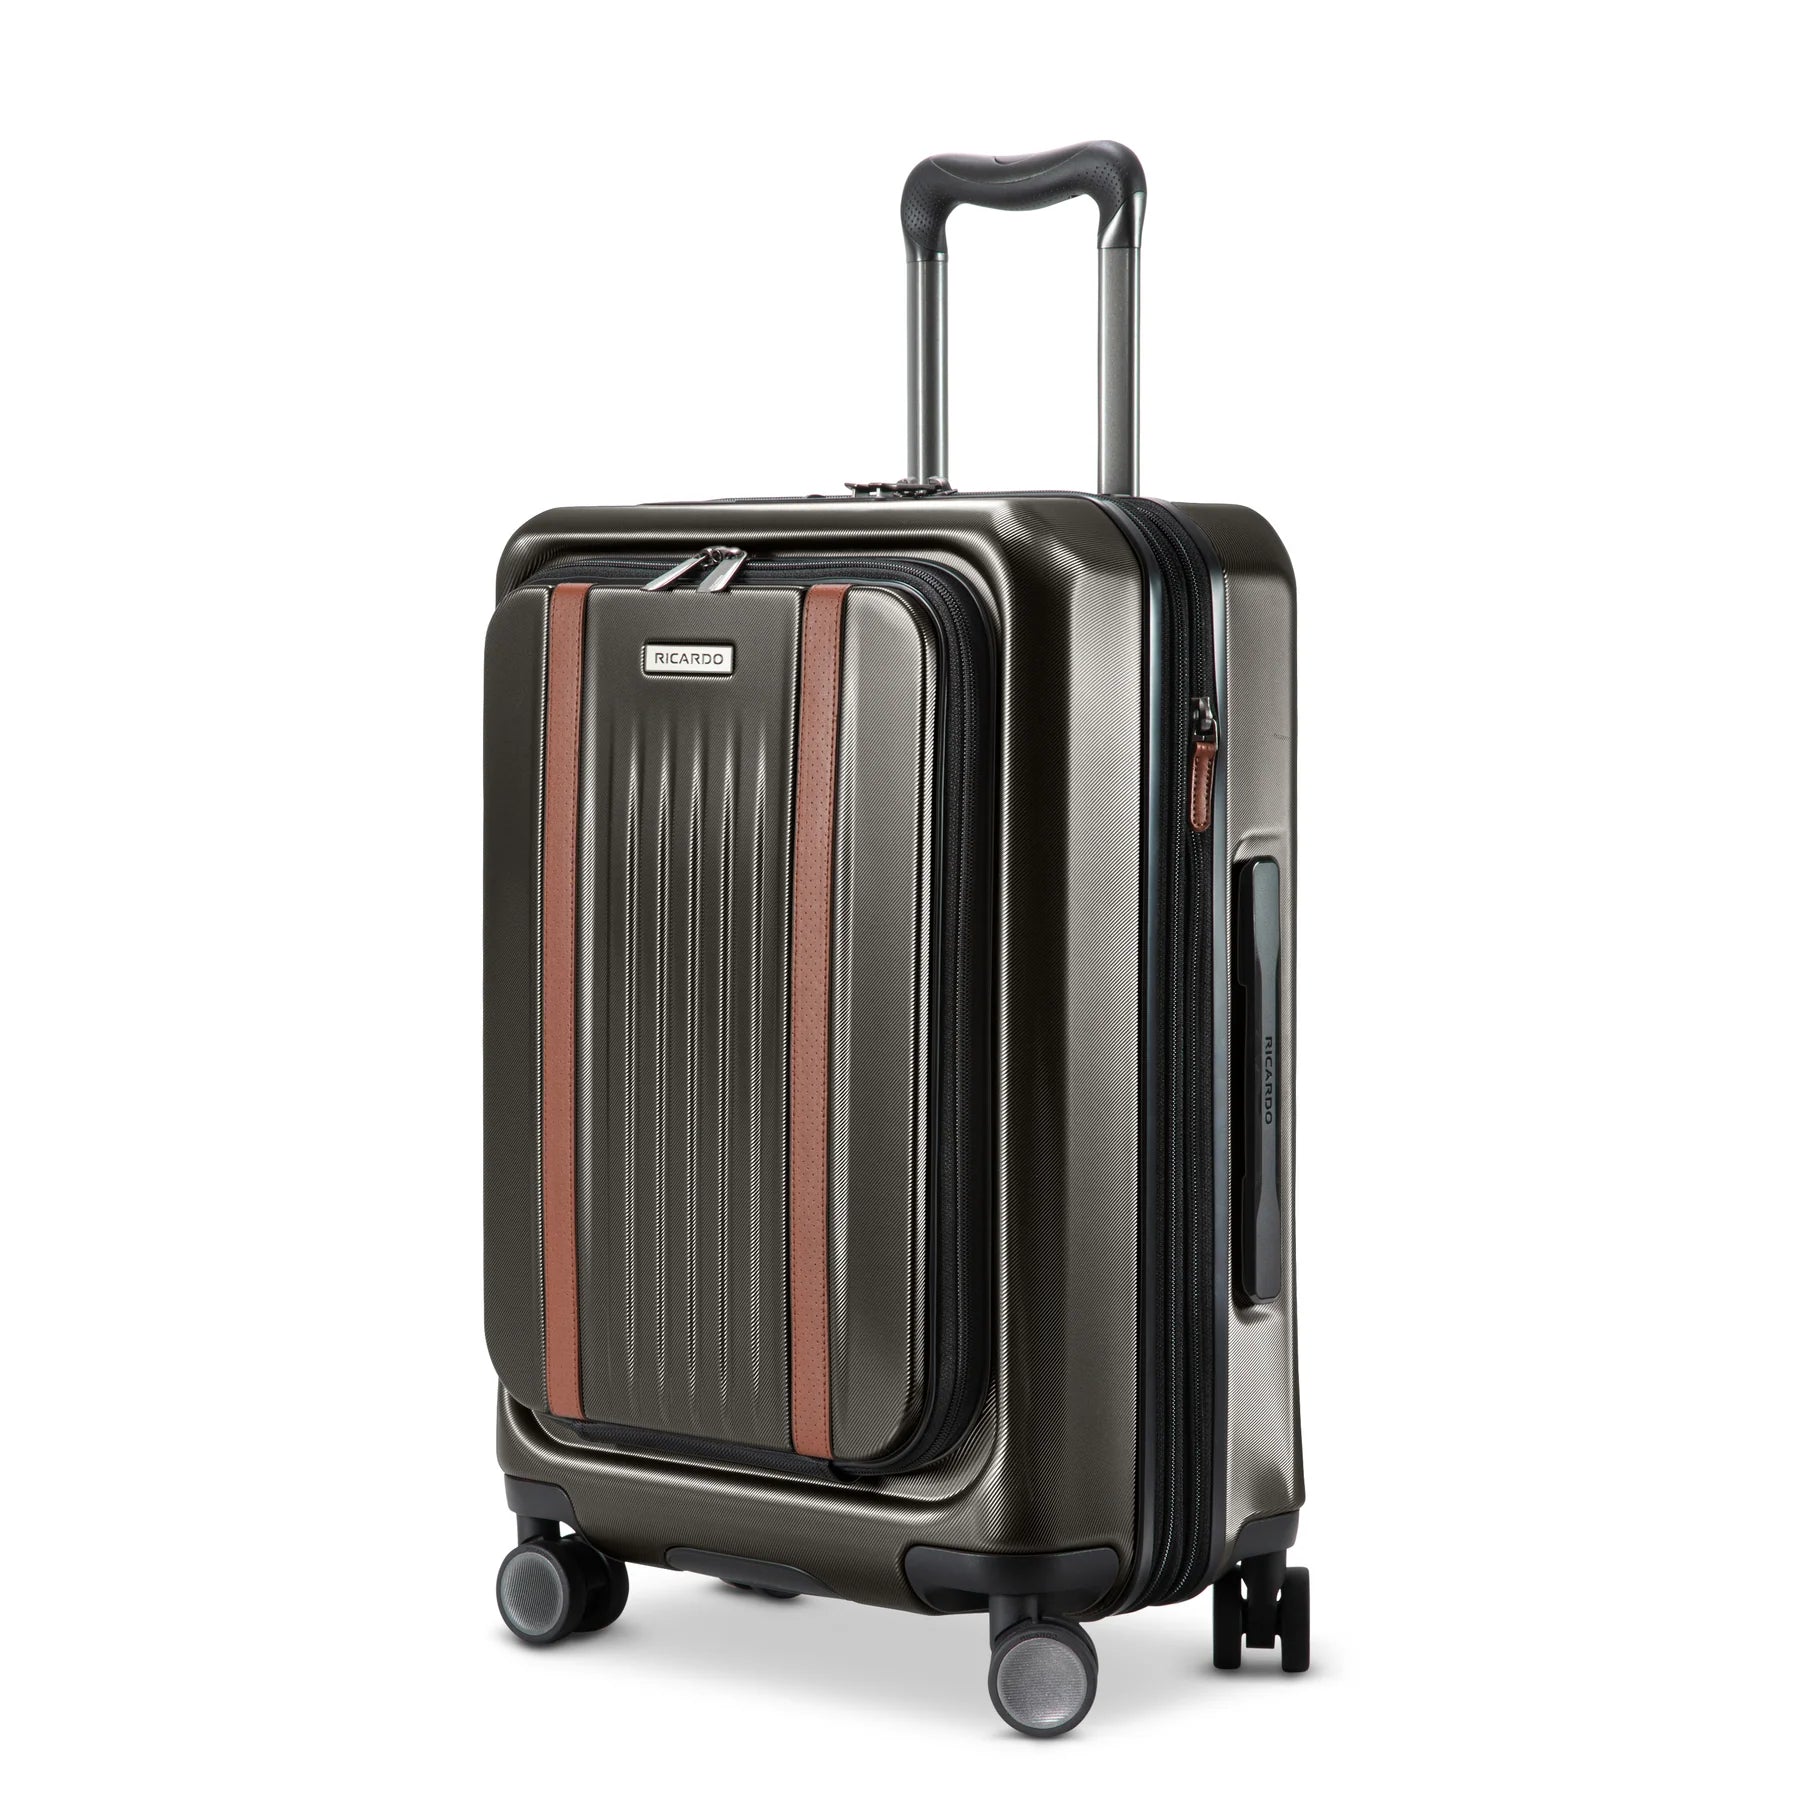 Montecito 2.0 Fast Access Front-Opening Hardside Carry-On Expandable Spinner